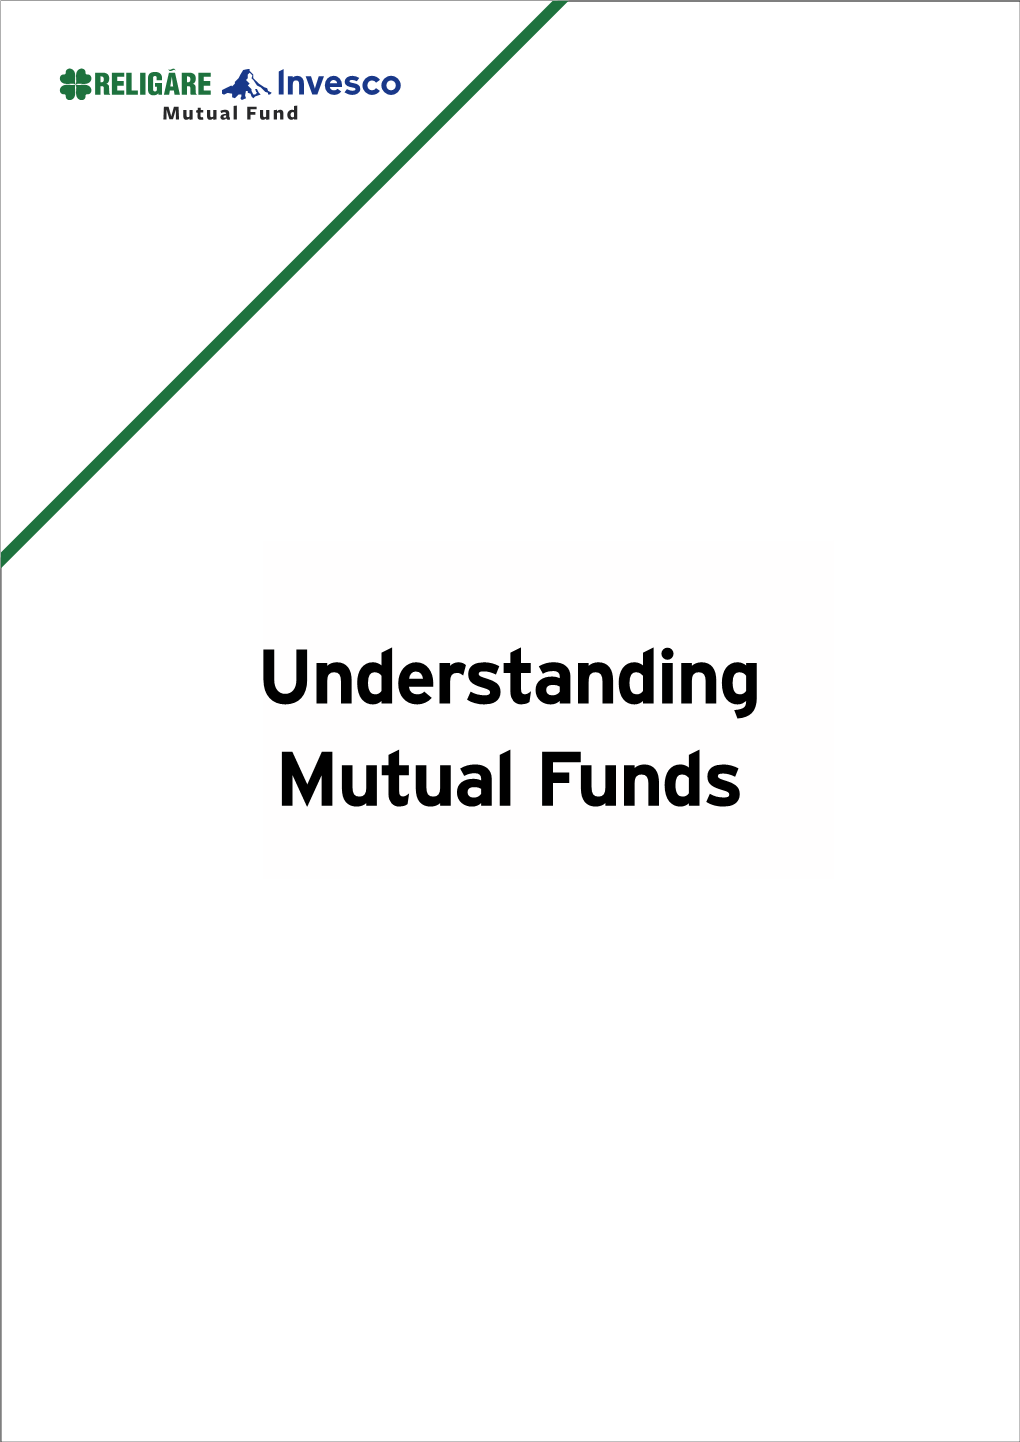 Understanding Mutual Funds Contents